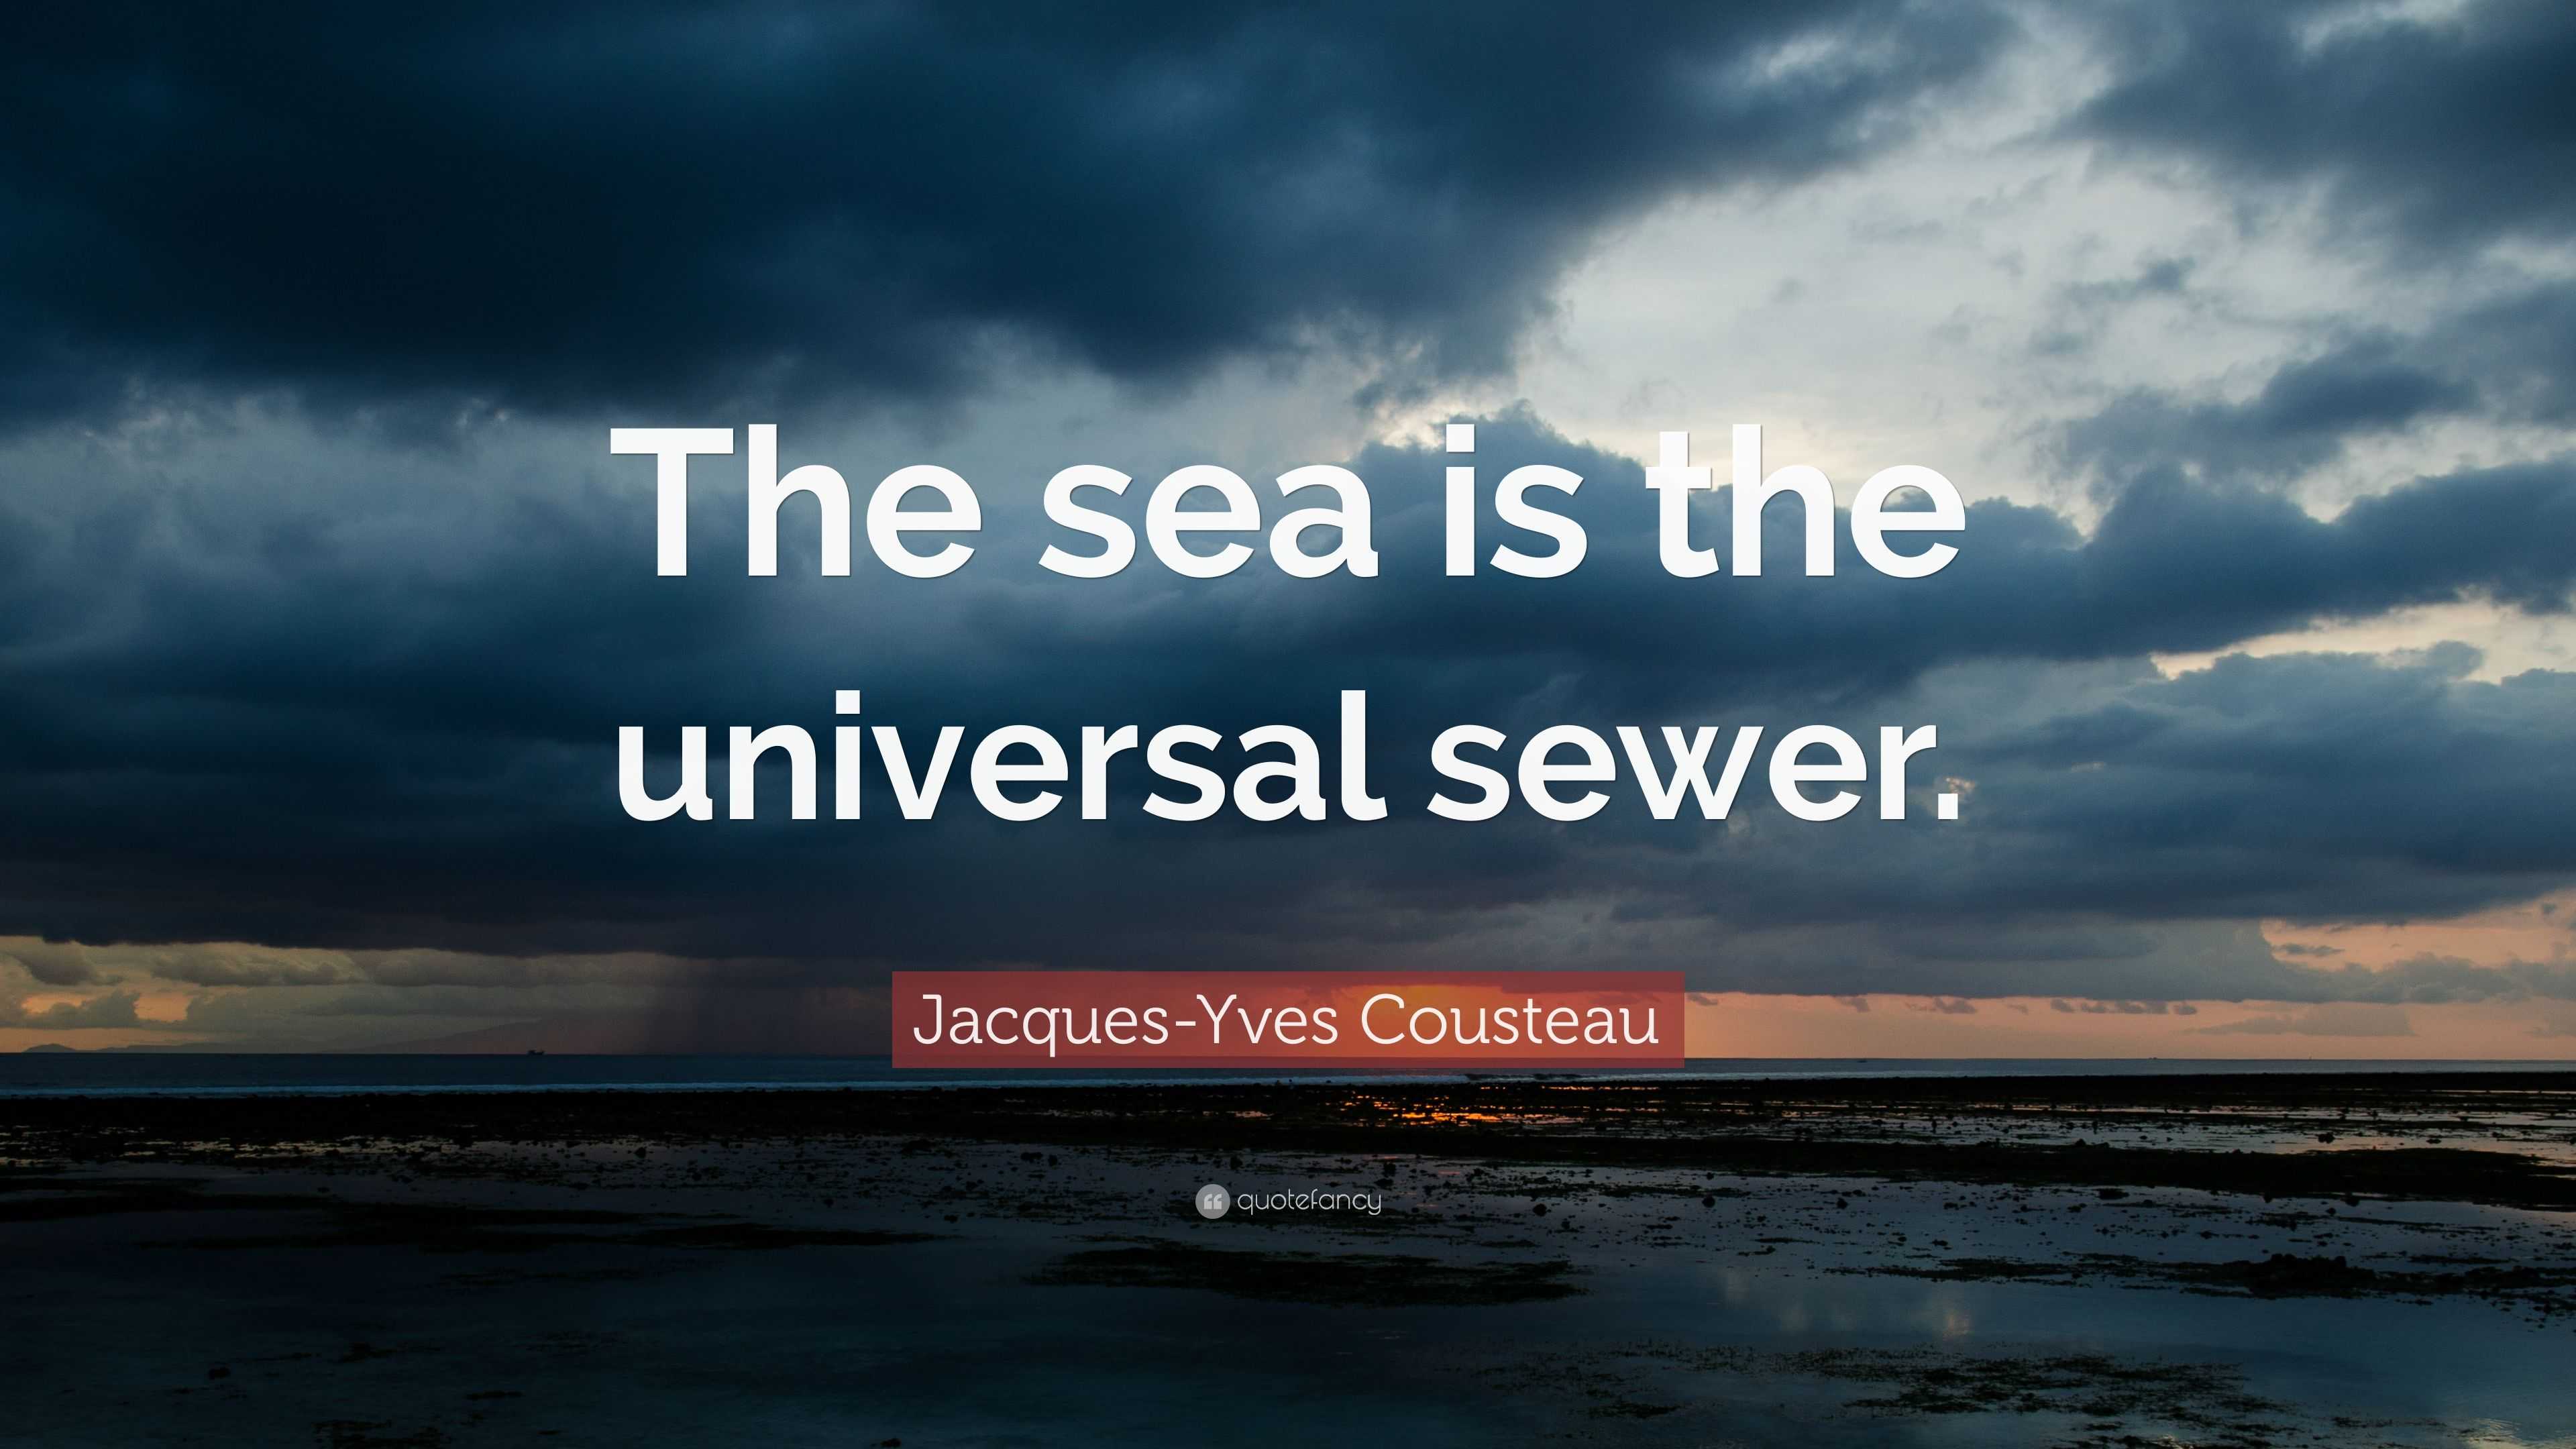 The sea is the universal